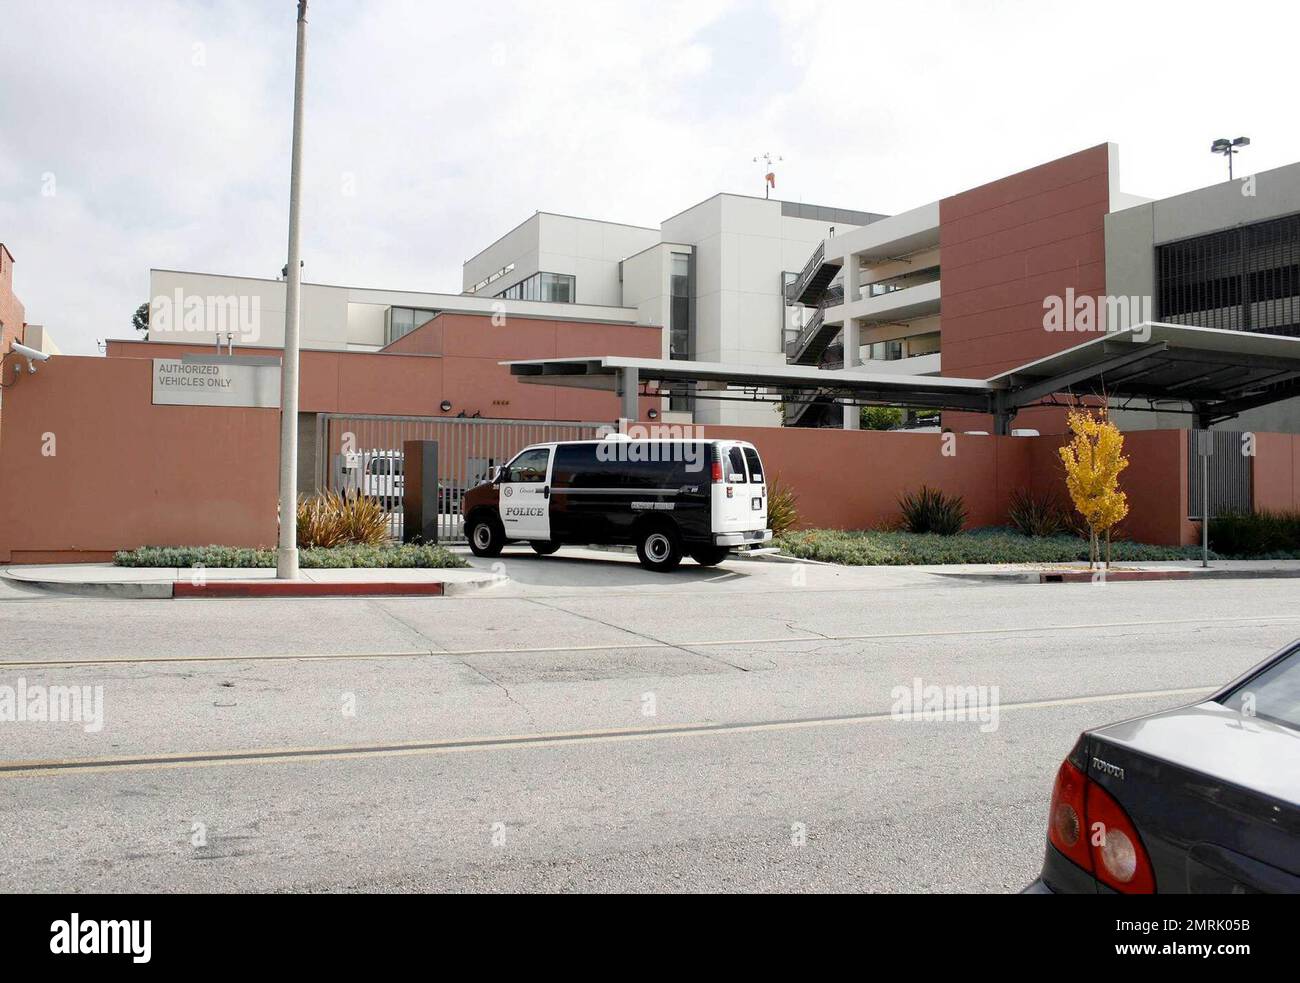 This is the Glendale City Jail where Kiefer Sutherland is currently serving his 48-day jail sentence. The jail is a state-of-the-art podular facility that is 32,000 square feet with 48 cells and 96 beds. It is the third busiest municipal jail in Los Angeles county and each 10x8 cell is double occupancy with toilet, washbasin and water fountain. A shower is provided in the day room area. Los Angeles, CA. 12/6/07. Stock Photo